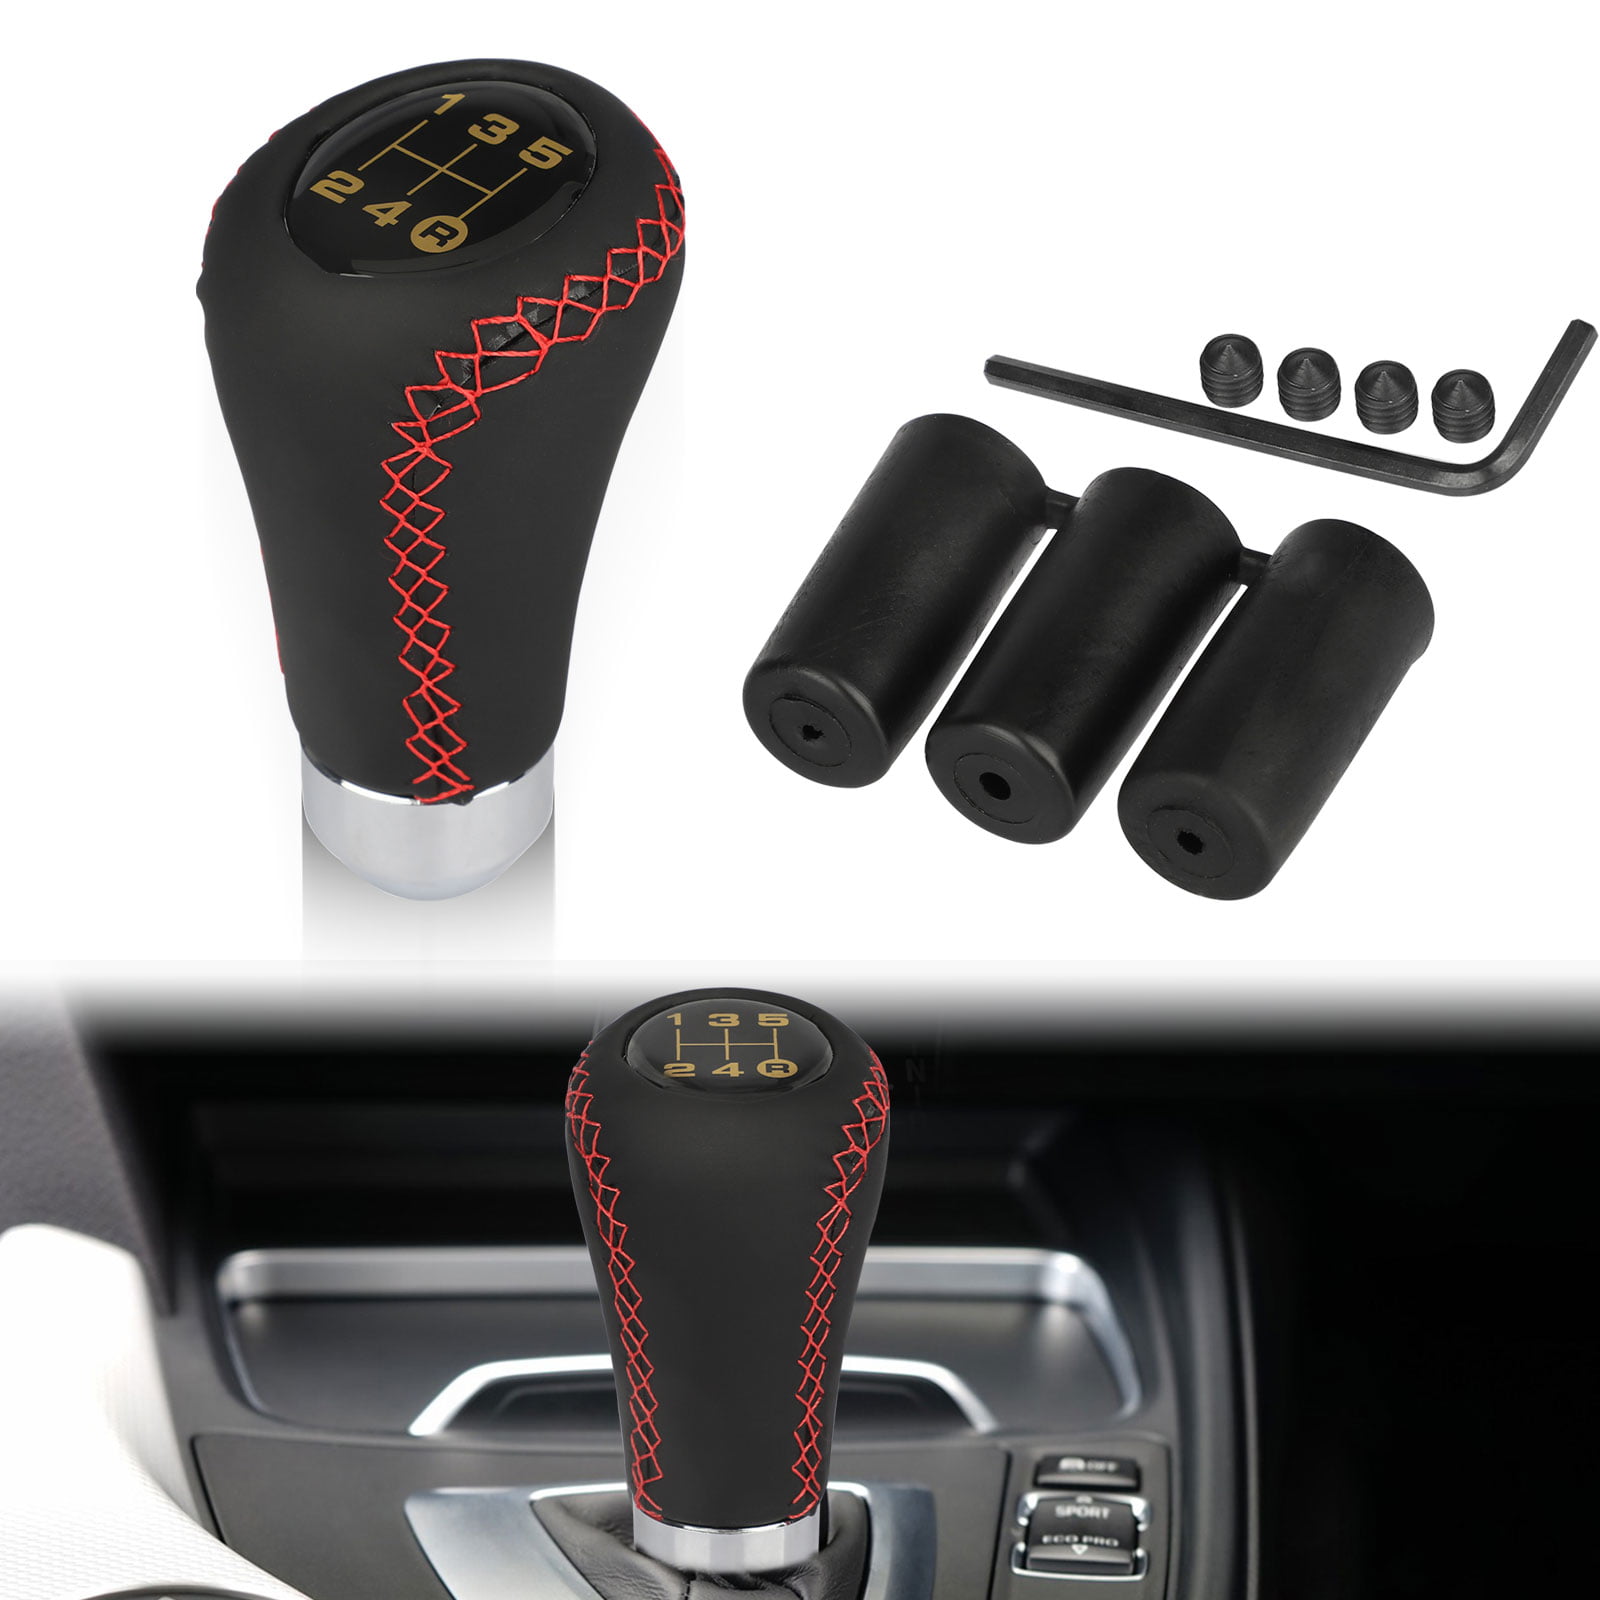 Semoss Car Tuning Accessories 5 Speed Gear Shift Knob Boot Cover Universal 12mm